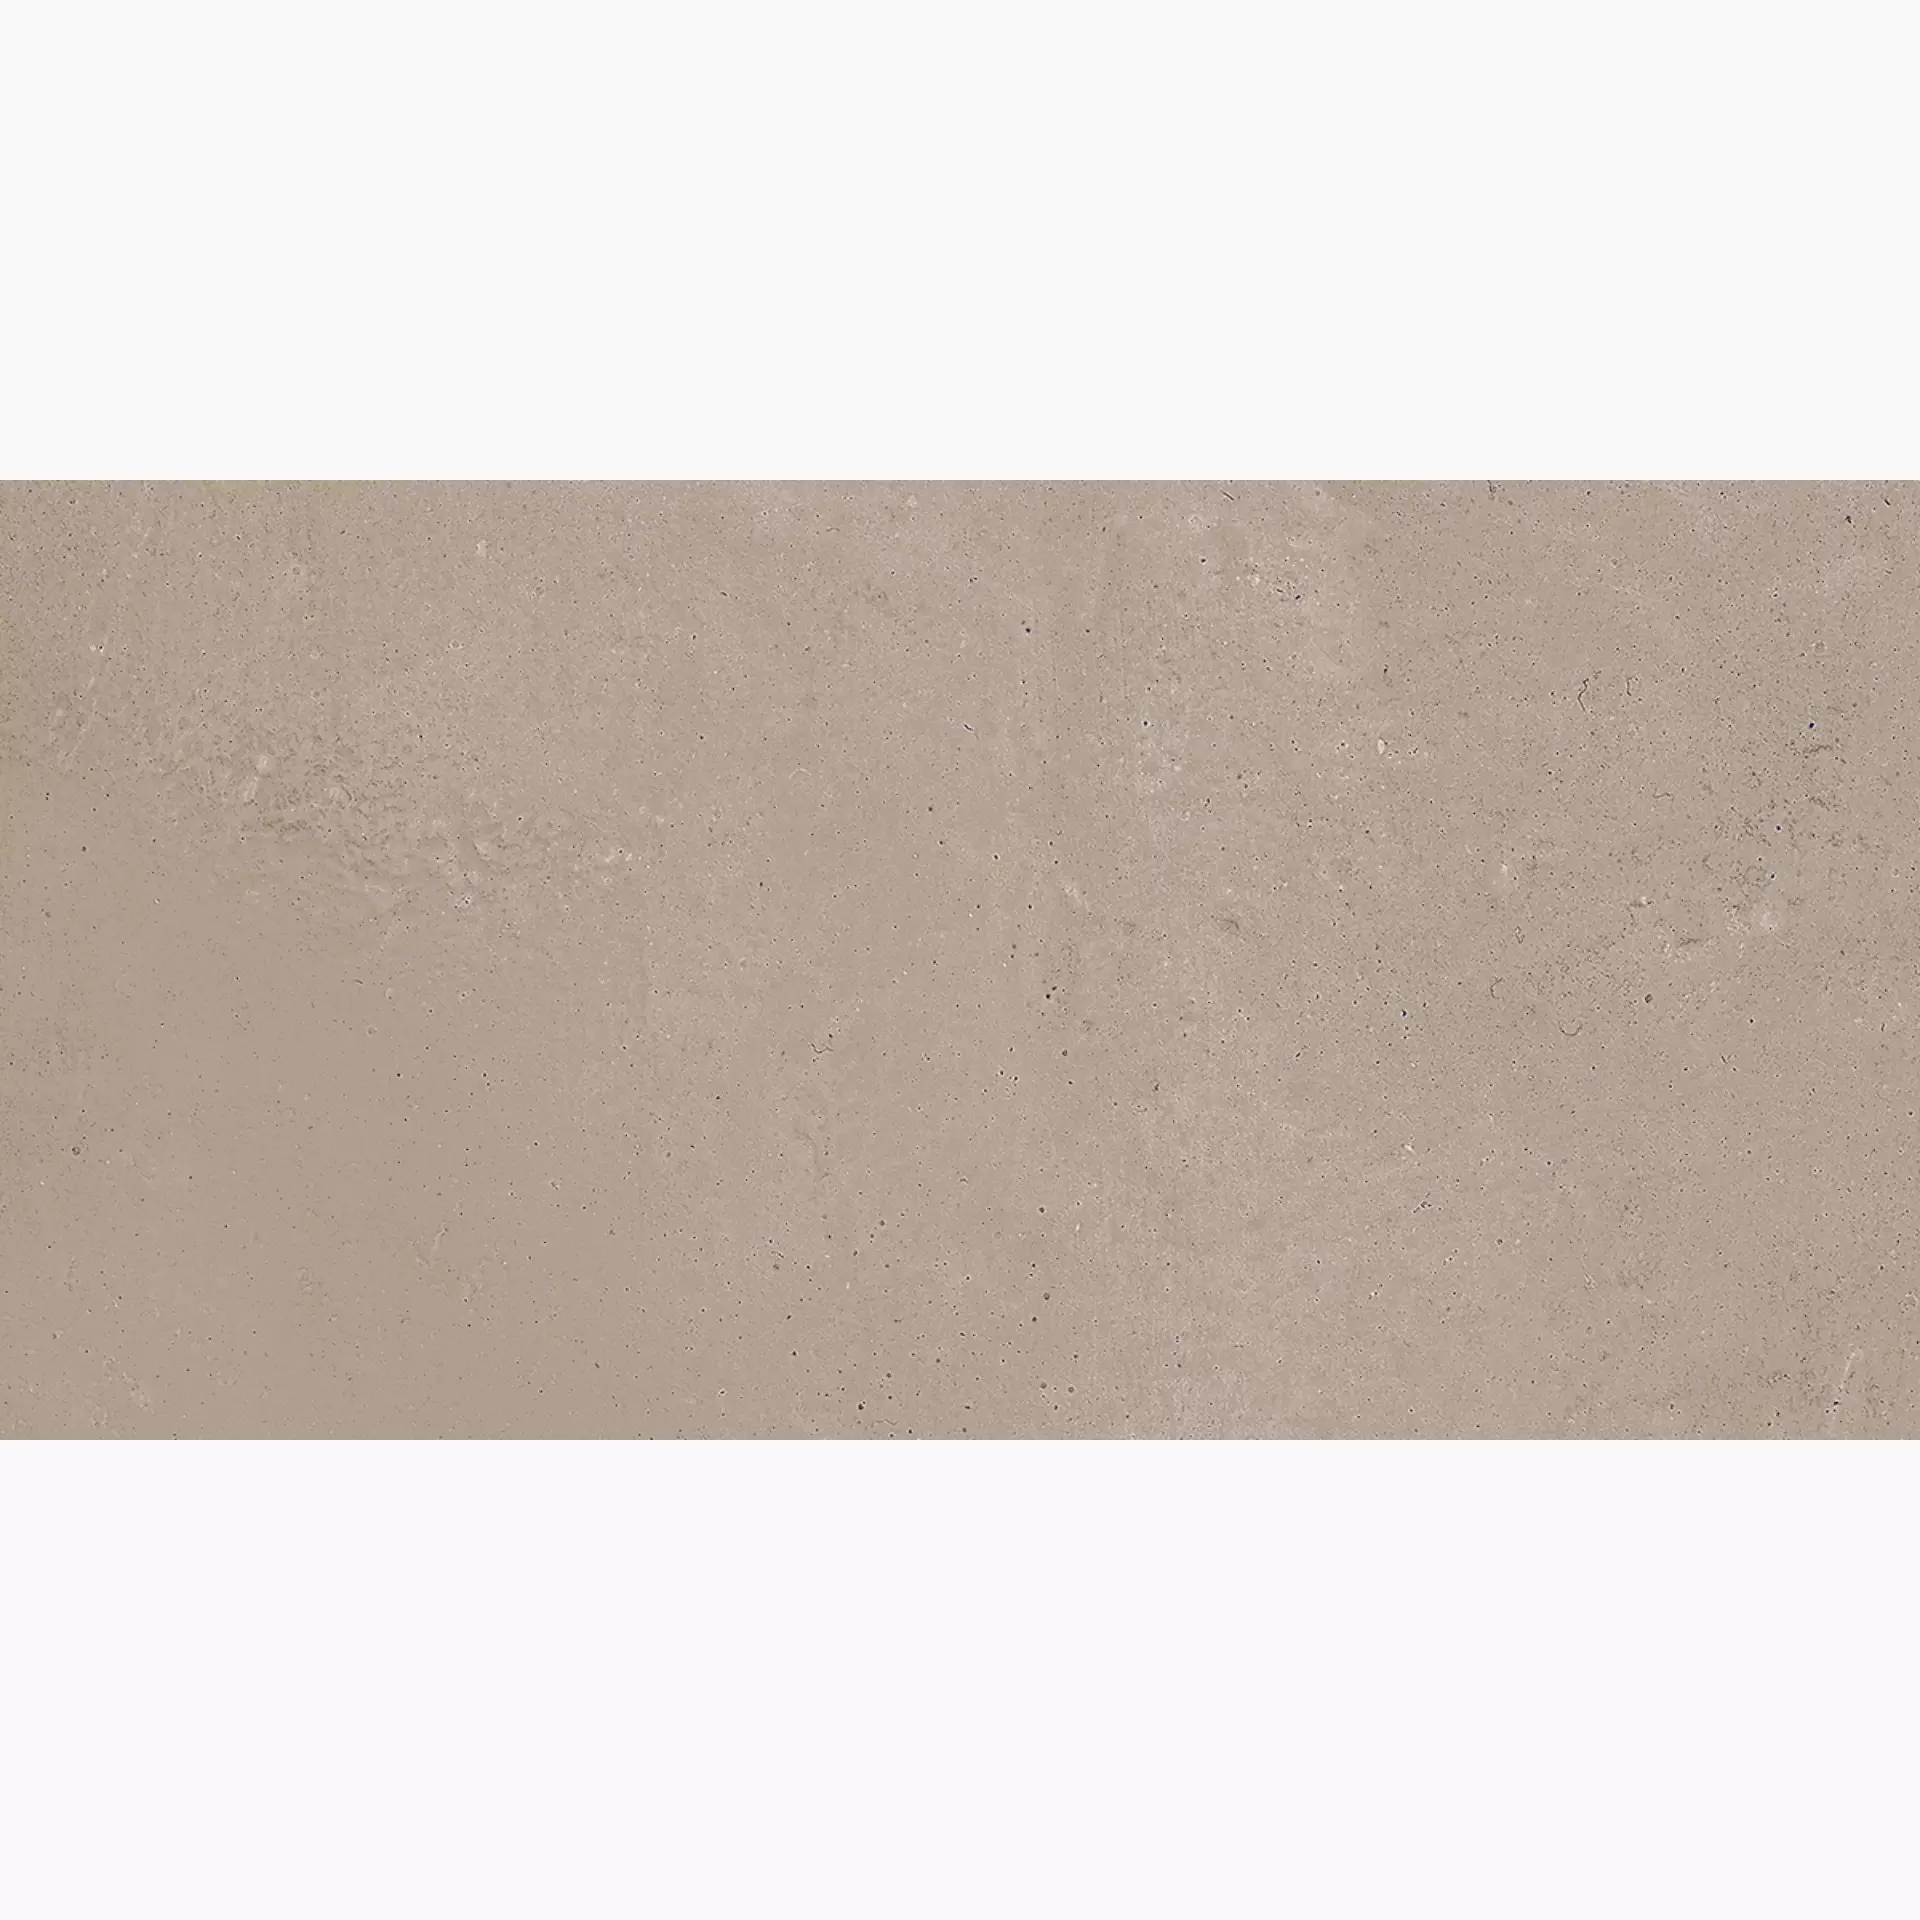 Sant Agostino Ritual Greige Natural CSARIGR130 30x60cm rectified 10mm